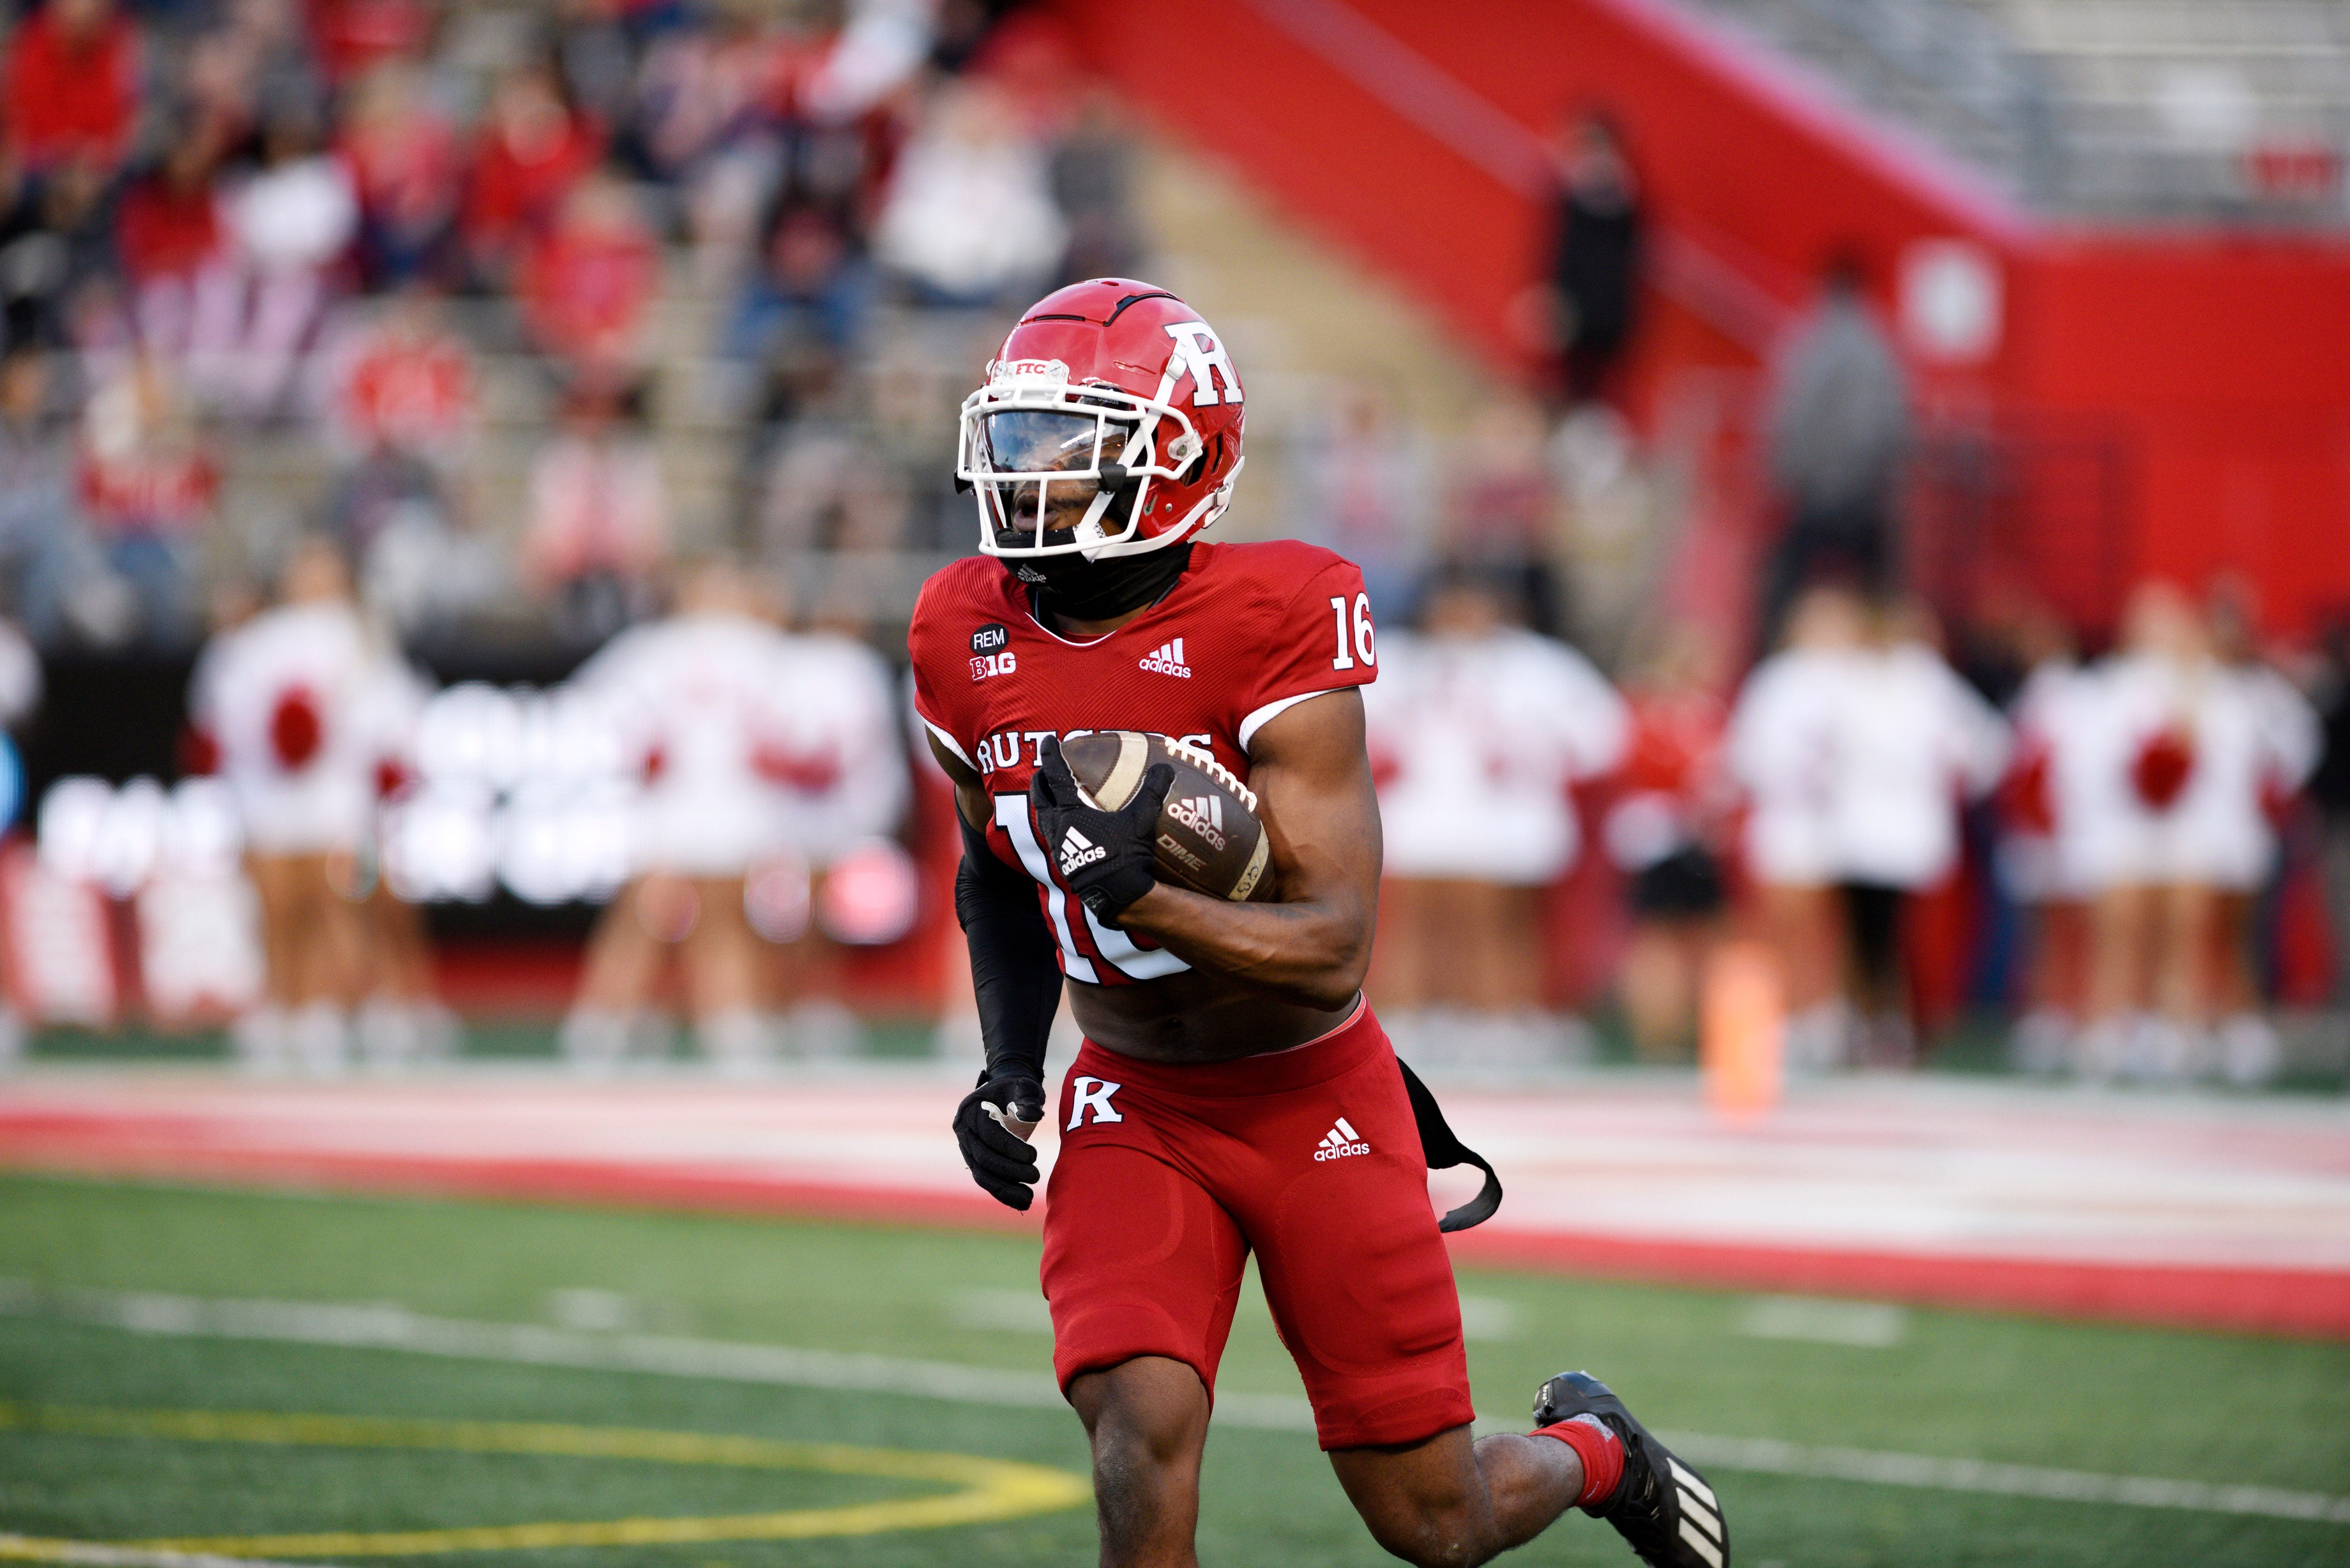 Rutgers football Scarlet-White Game at SHI Stadium on Friday, April 22, 2022. S #16 Max Melton. Rutgers Football Spring Game  